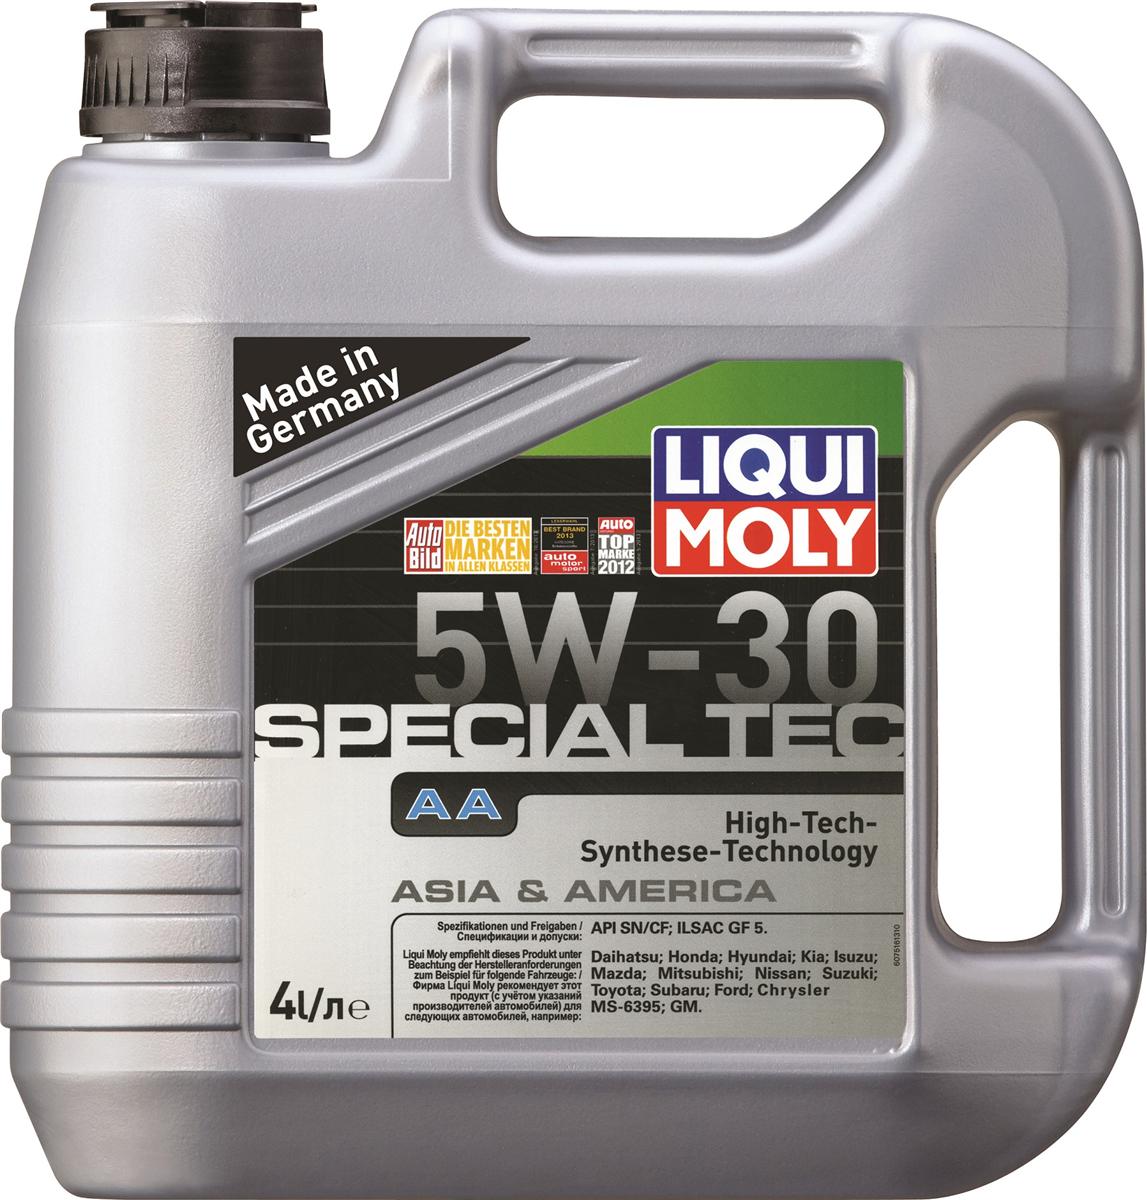 liqui-moly-special-tec-aa-synthetic-engine-oil-5w30-4l-goneracing-1505-27-goneracing@3.jpg